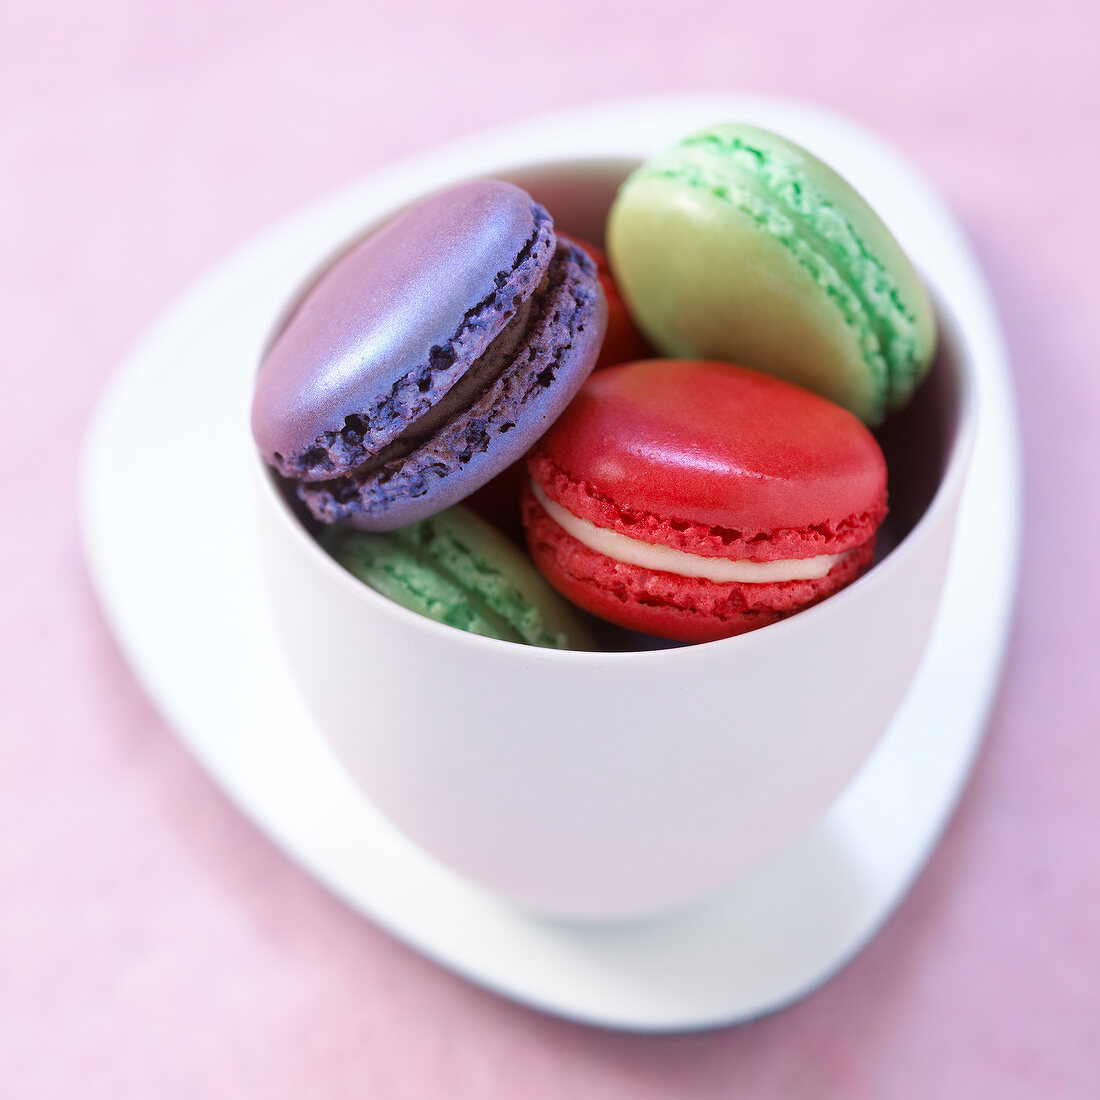 Three different flavored macaroons